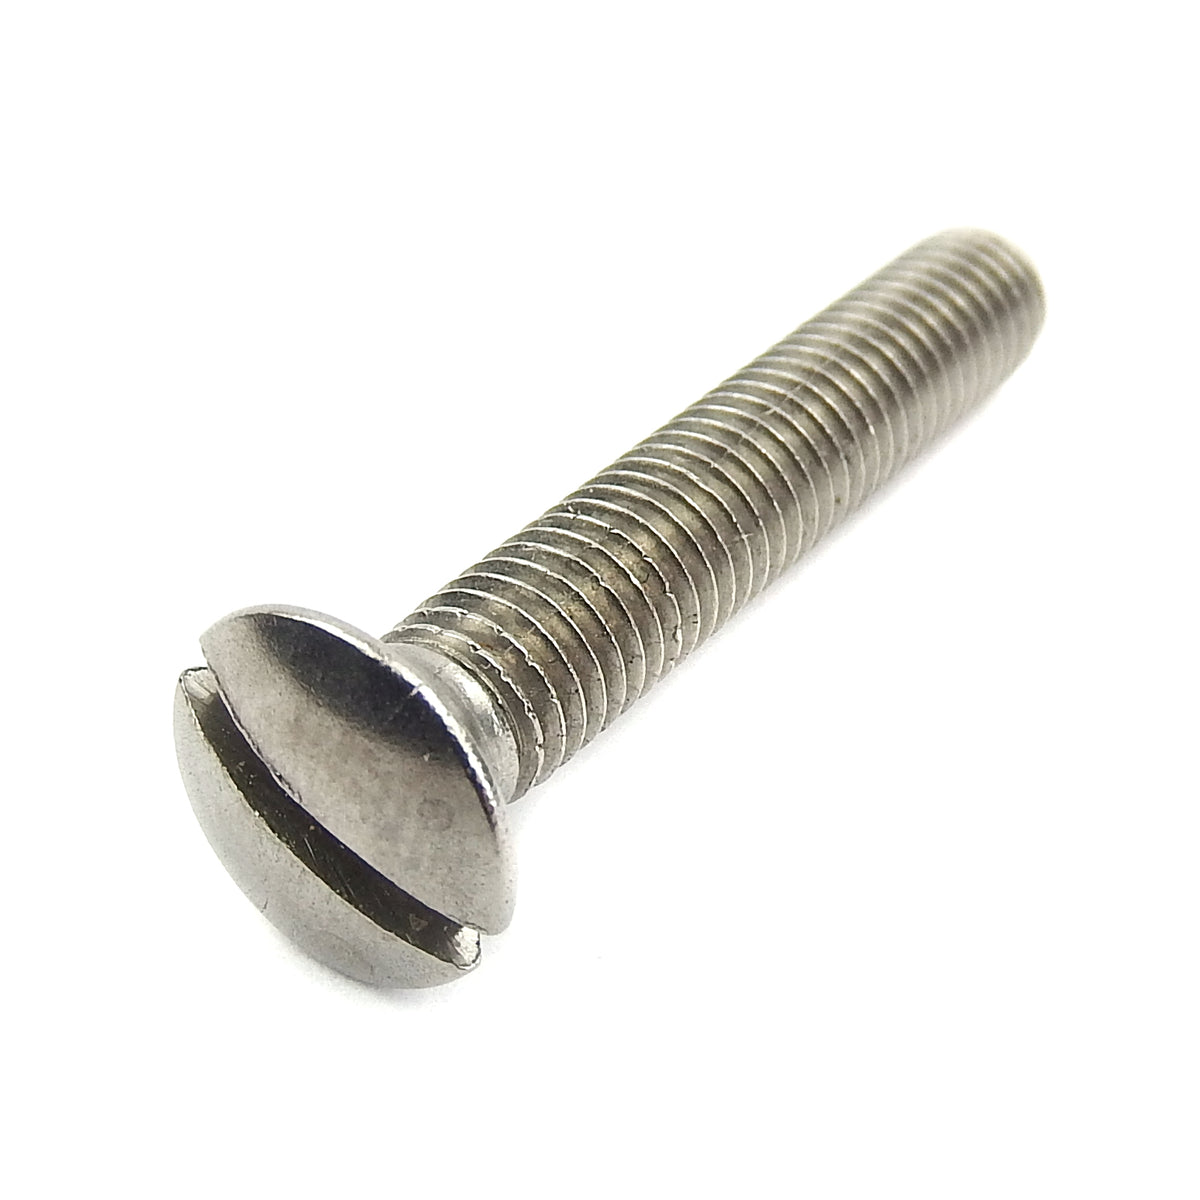 Counter Sunk Raised Screw M5 x 16mm Stainless